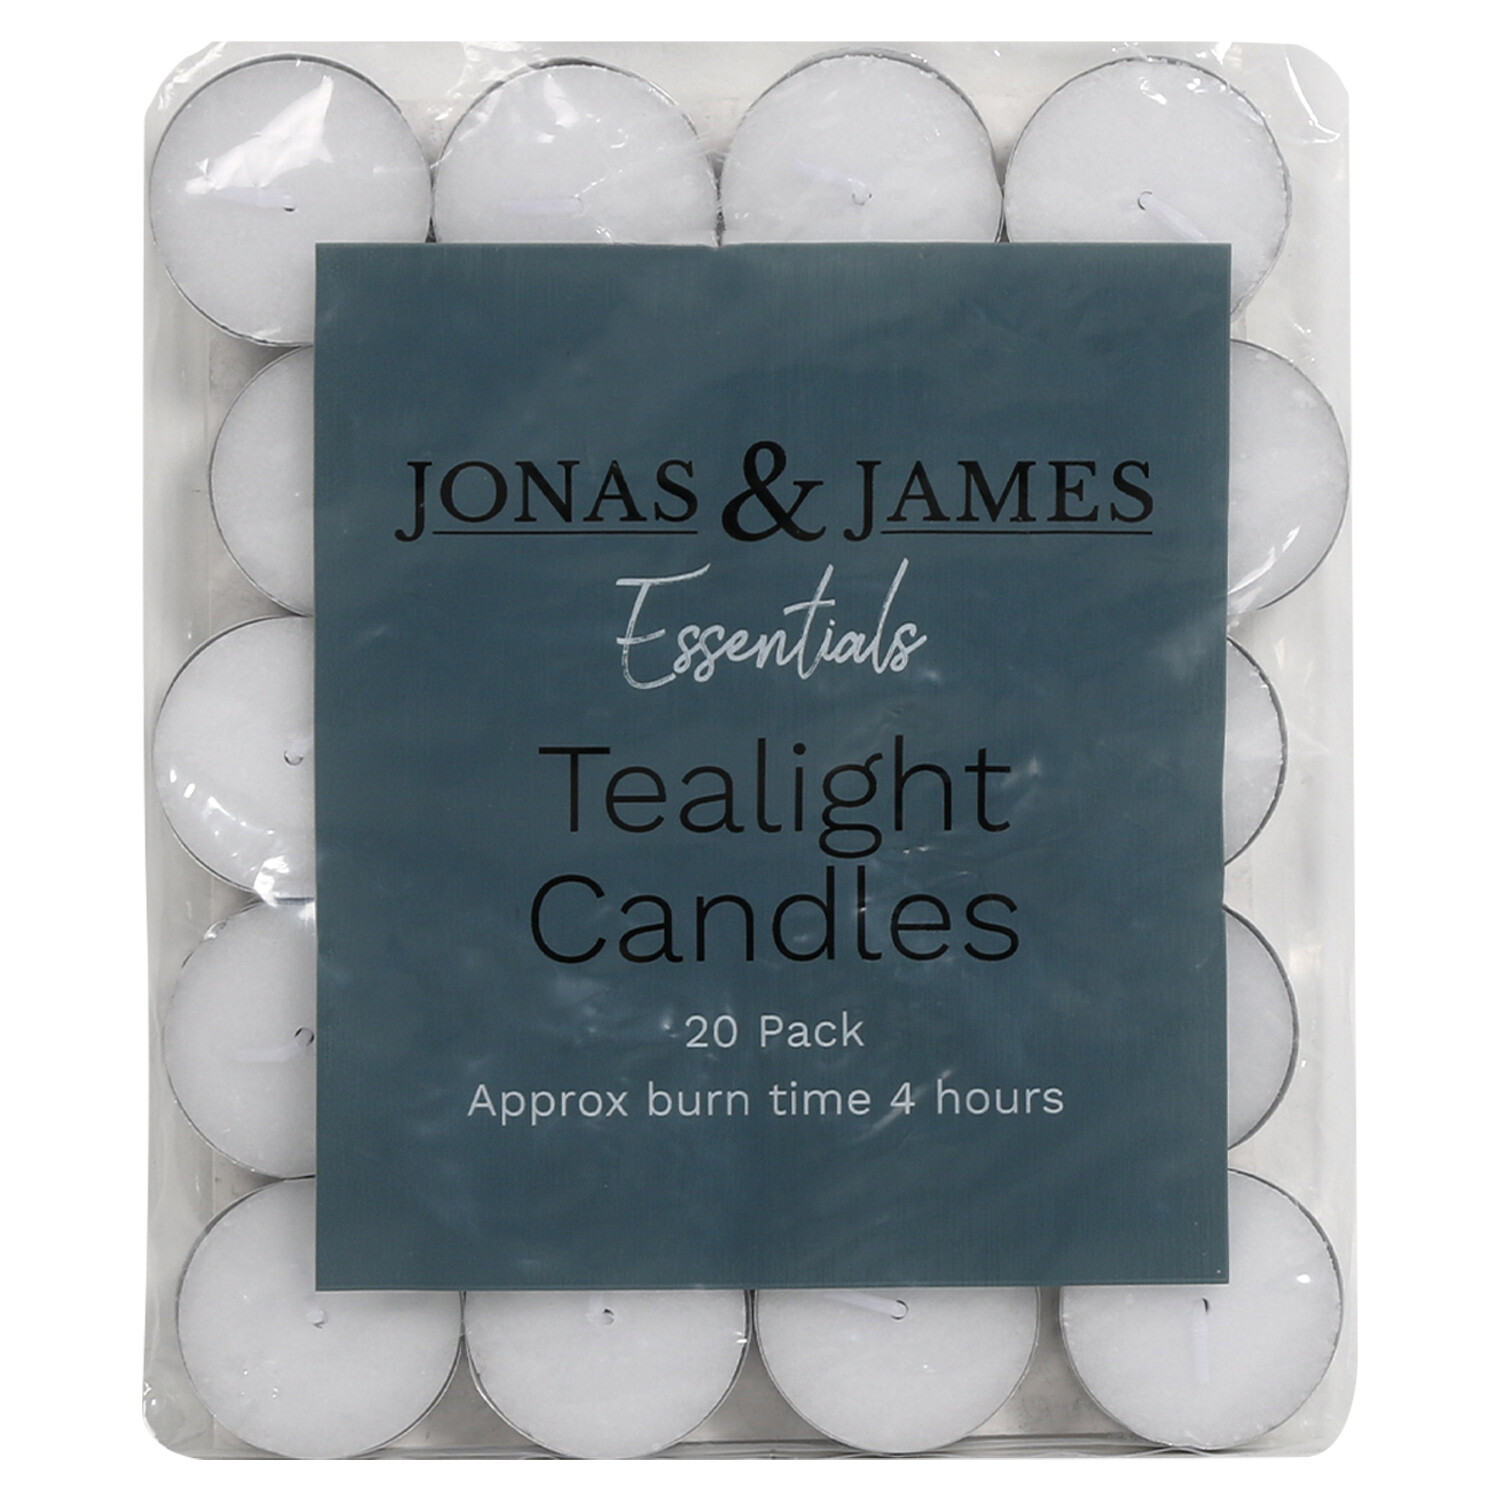 Jonas and James Essentials White Tealight Candle 20 Pack Image